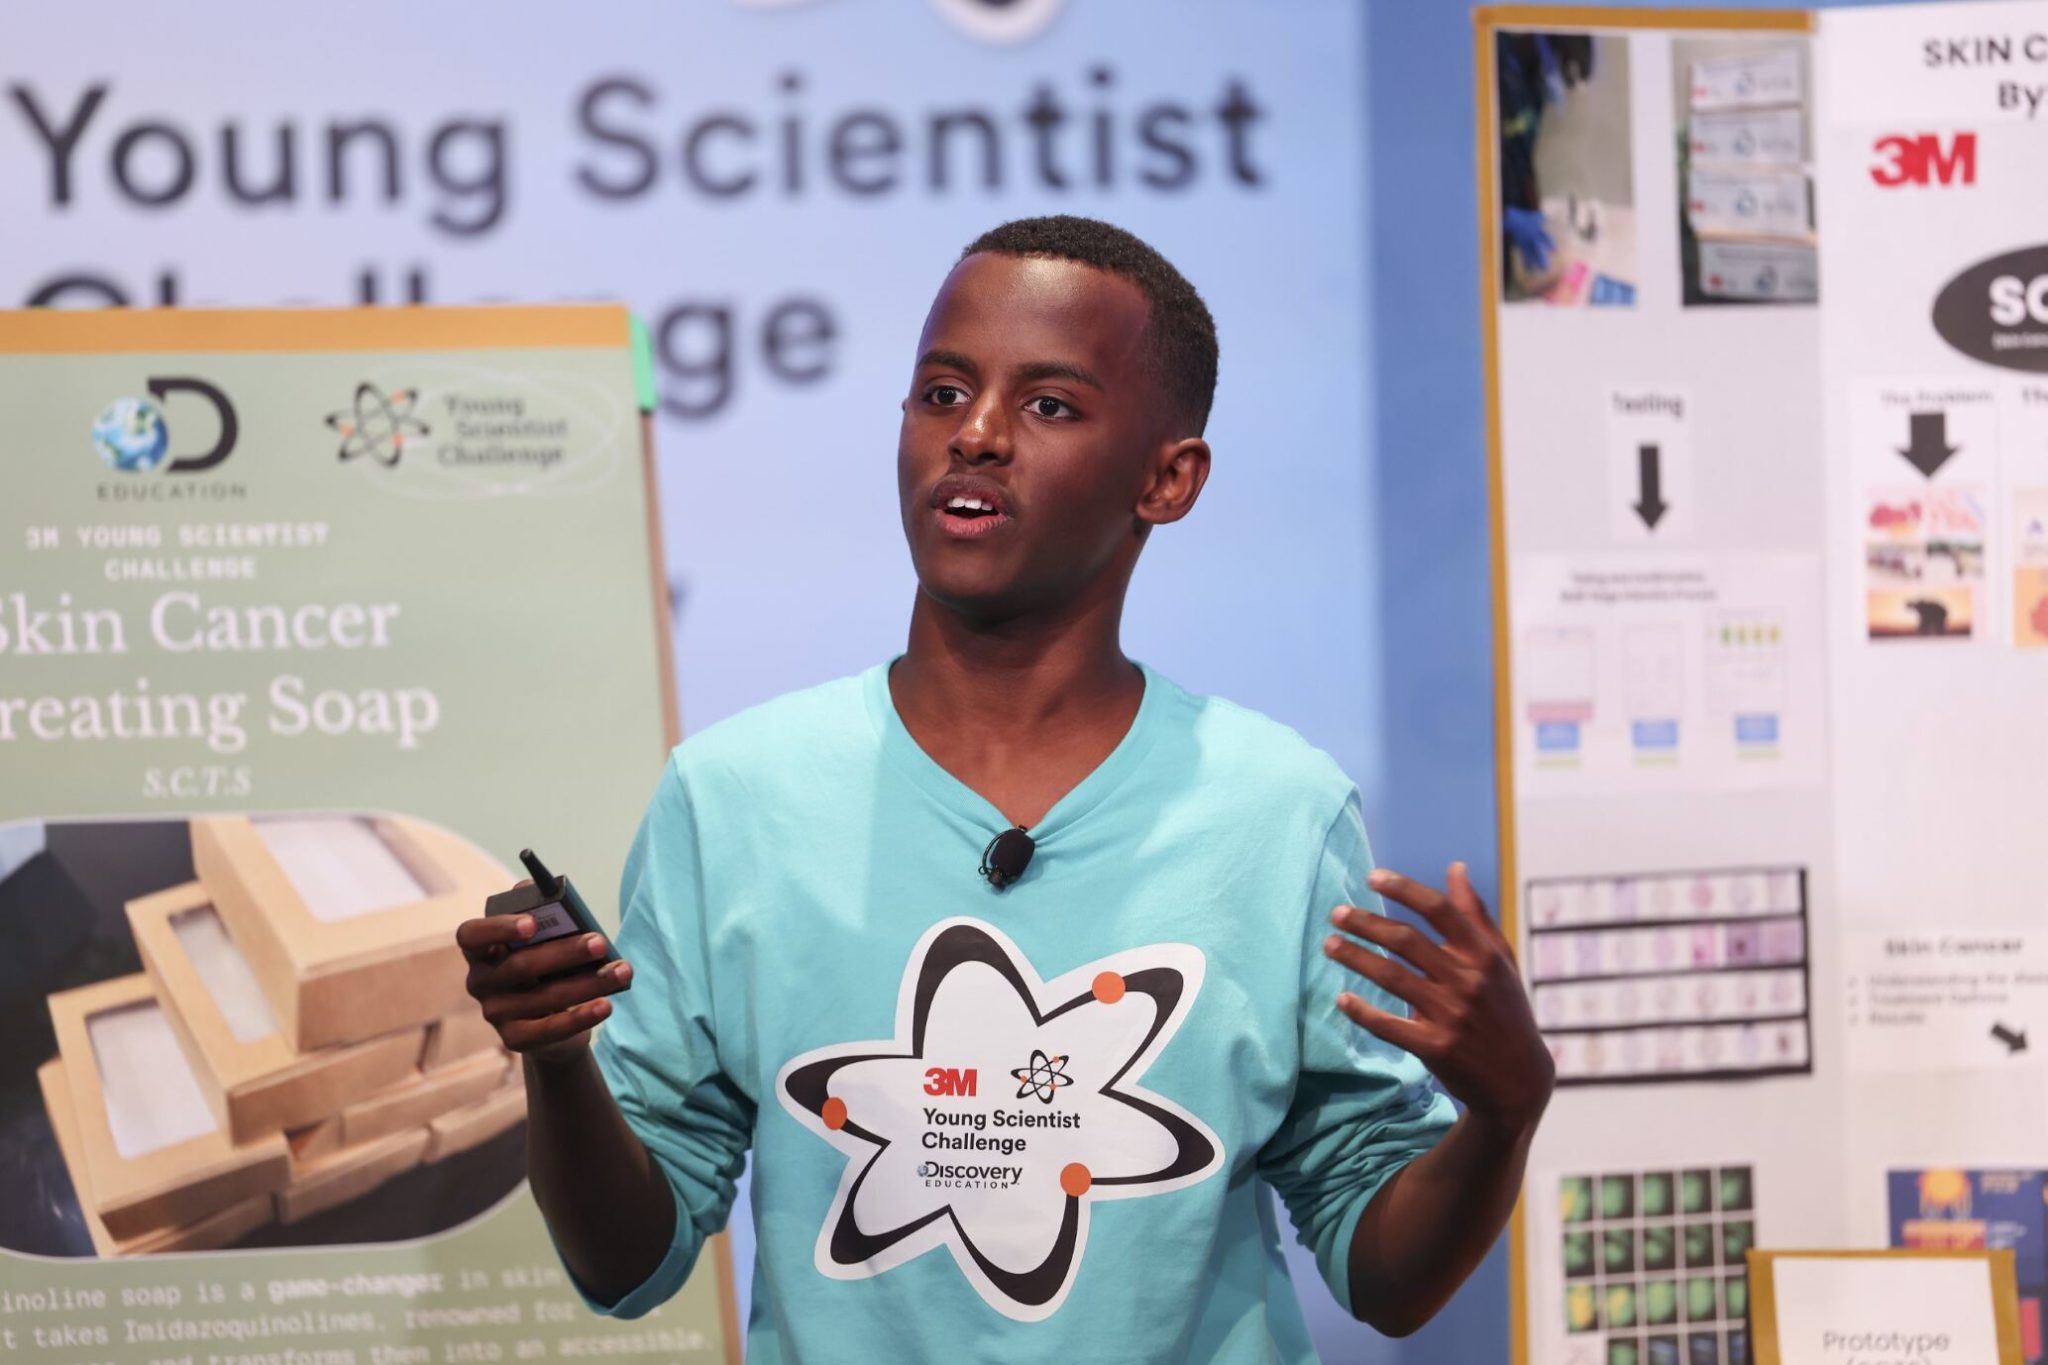 Heman Bekele presents his research idea for a skin cancer fighting soap. Photograph courtesy of 3M and Discovery Education.